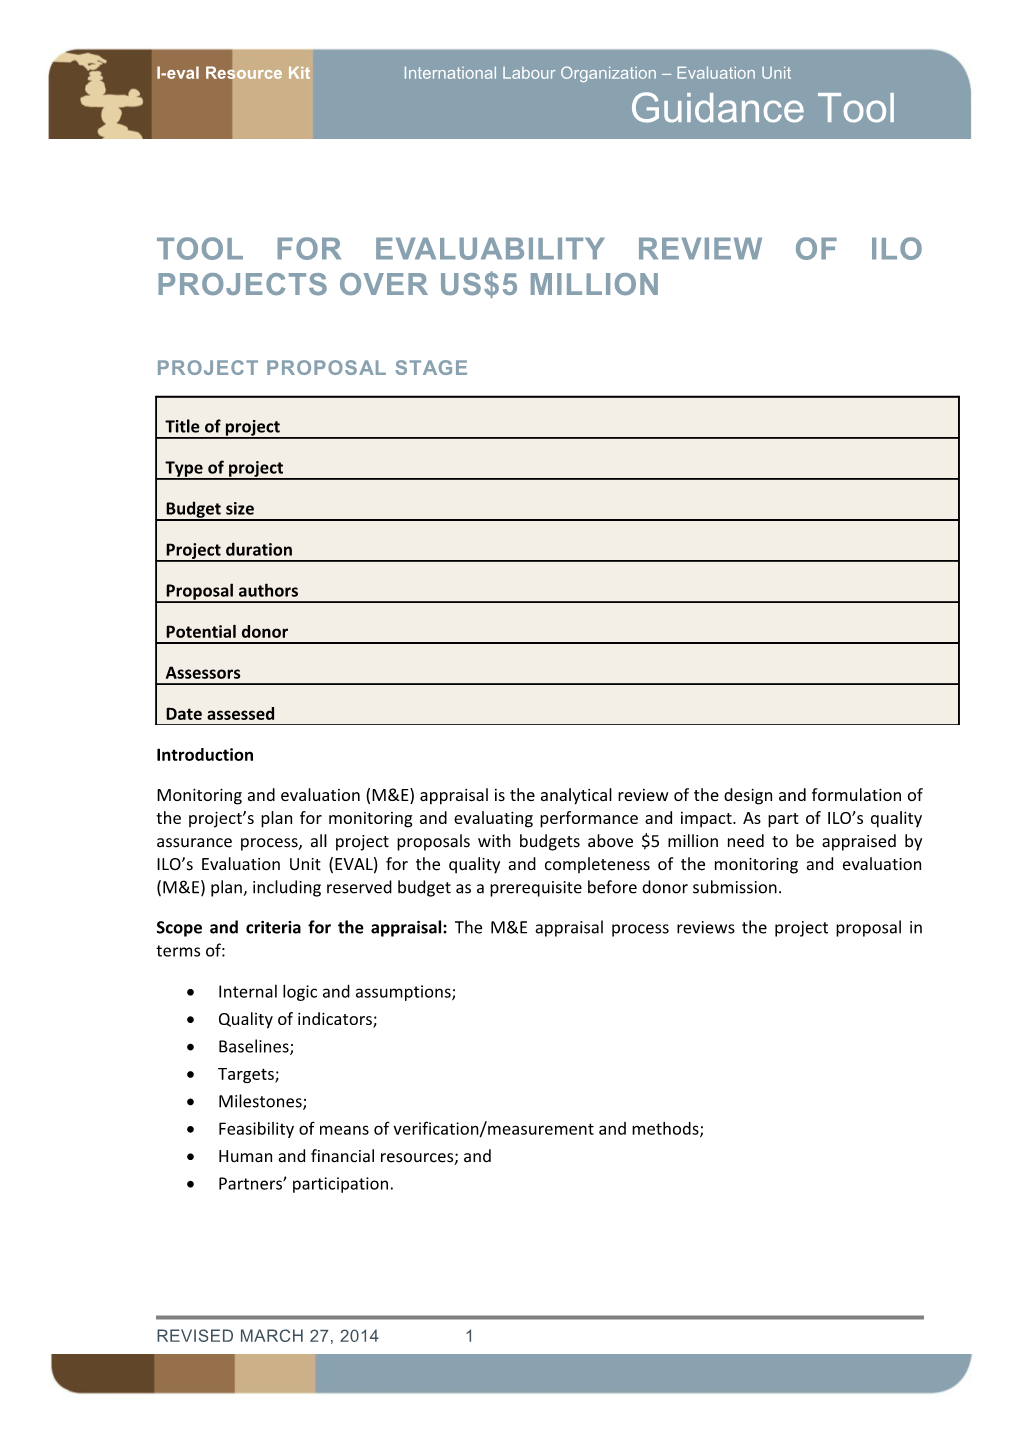 TOOL for Evaluability REVIEW of ILO PROJECTS Over US$5 MILLION